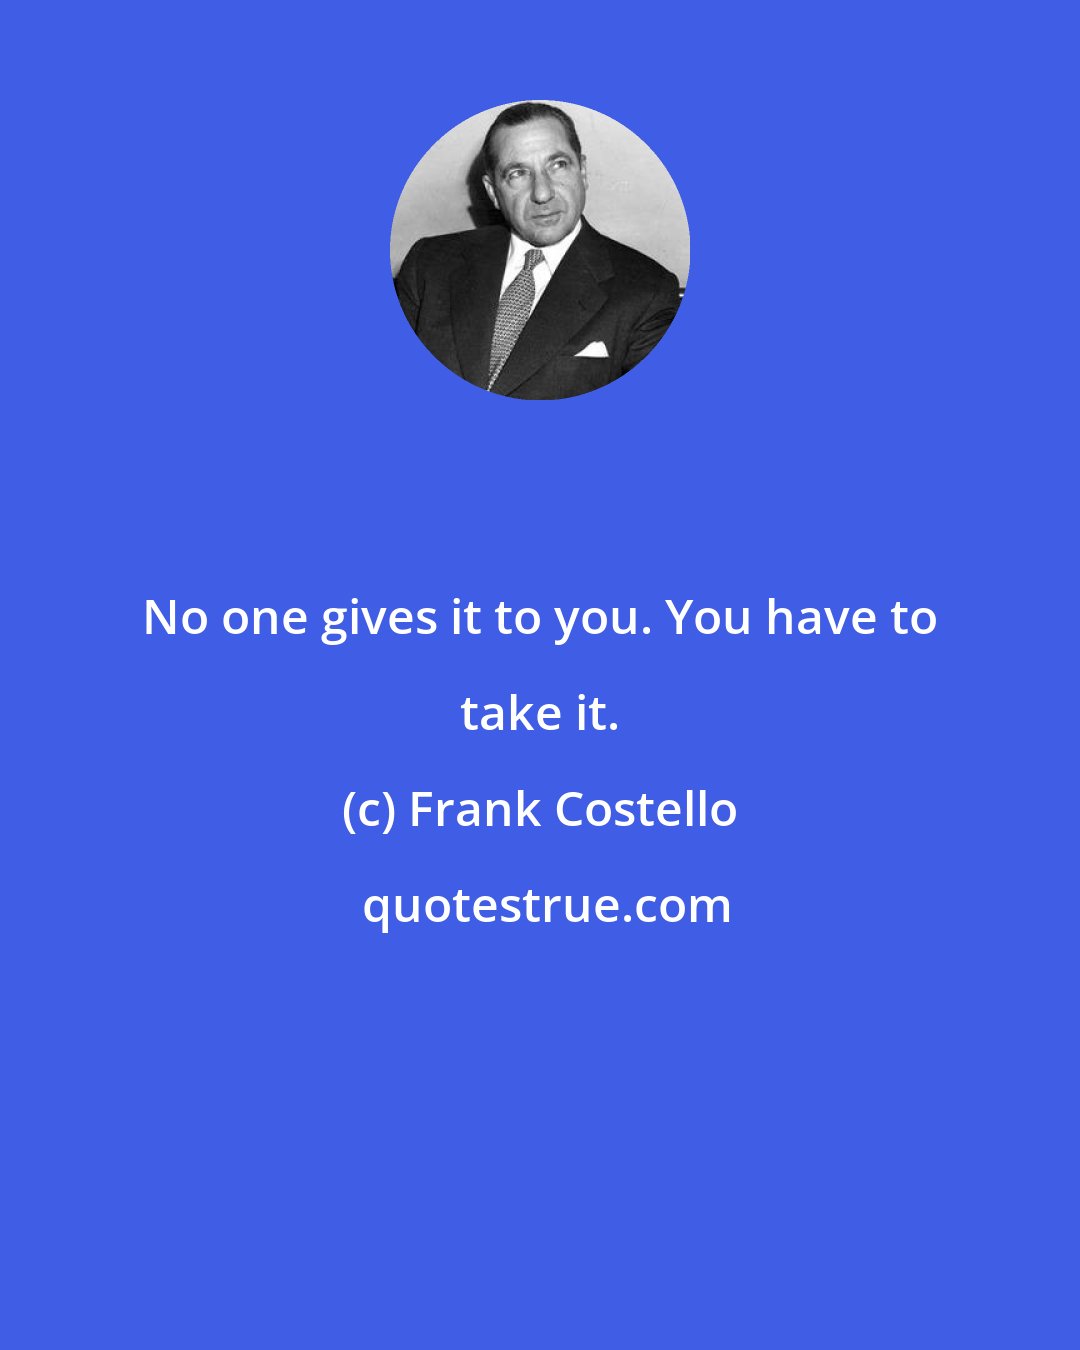 Frank Costello: No one gives it to you. You have to take it.